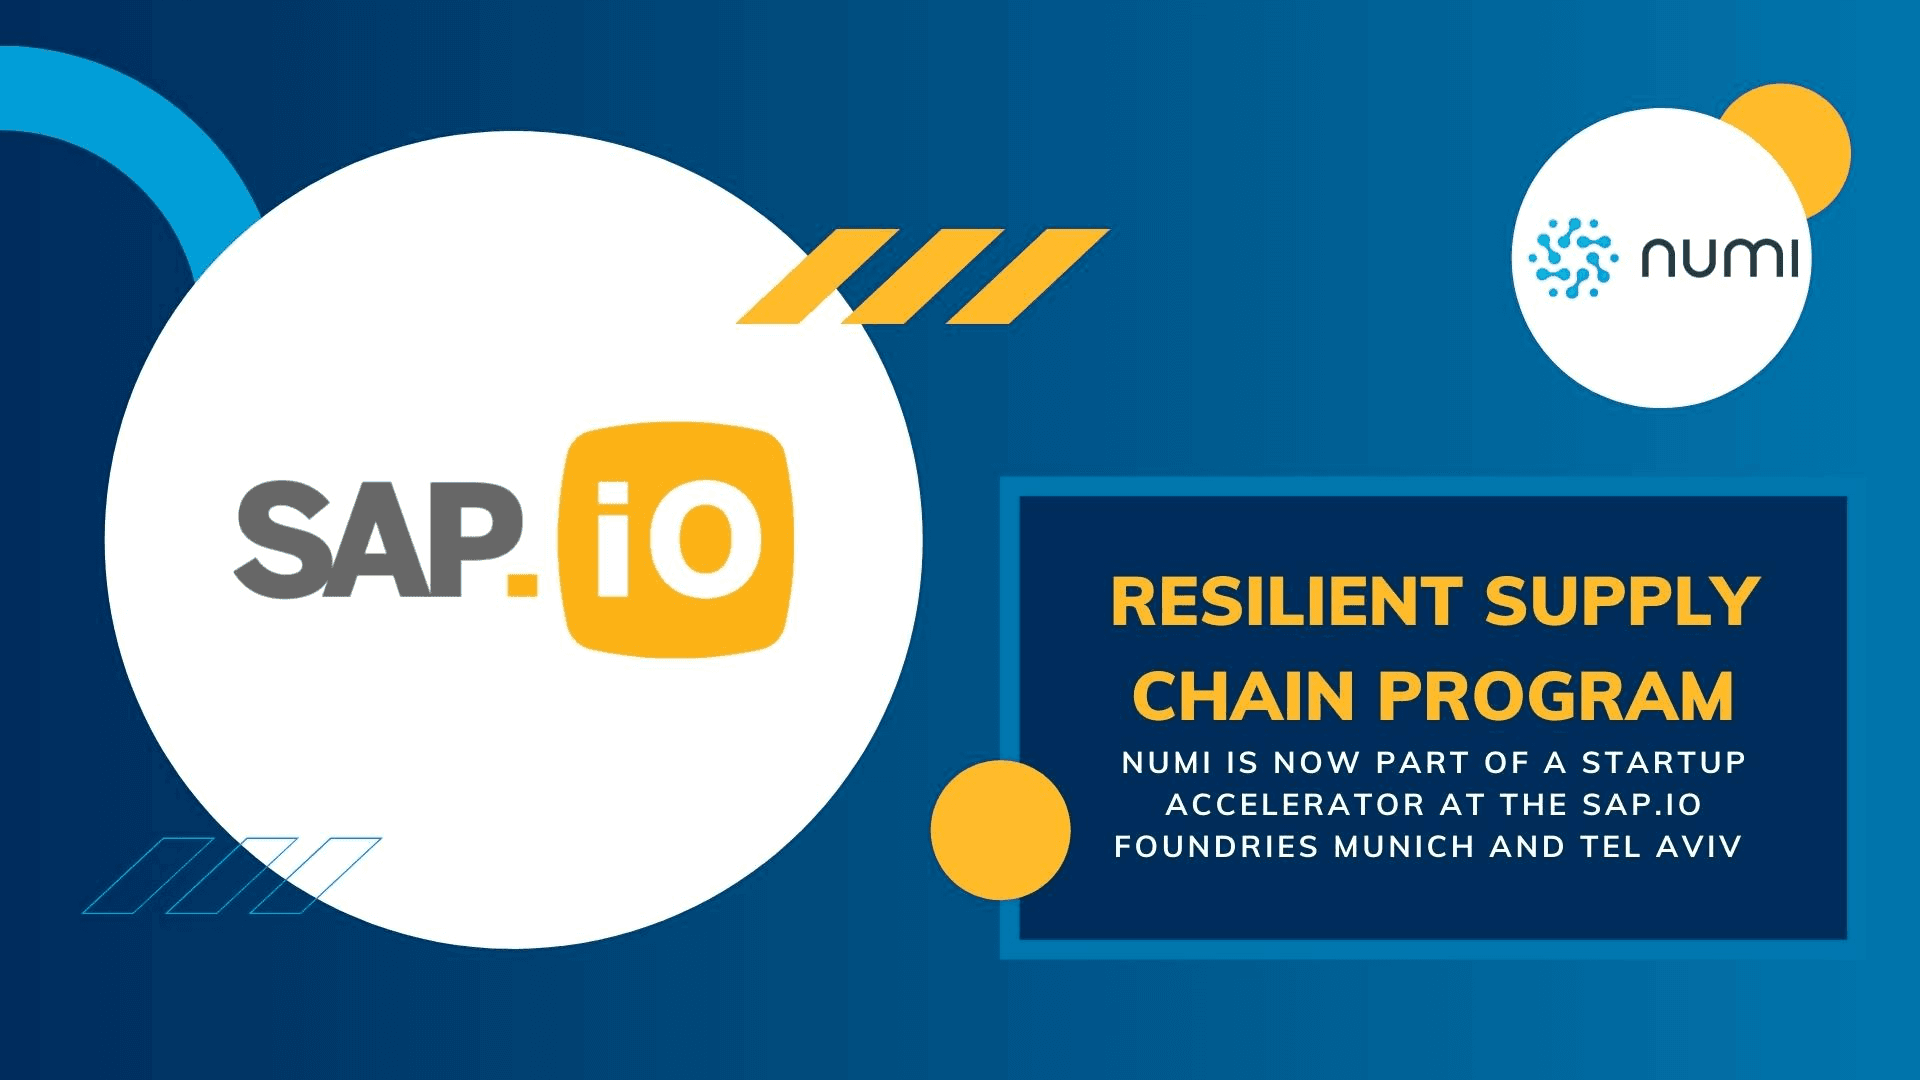 numi is part of SAP.iO Resilient Supply Chain Program